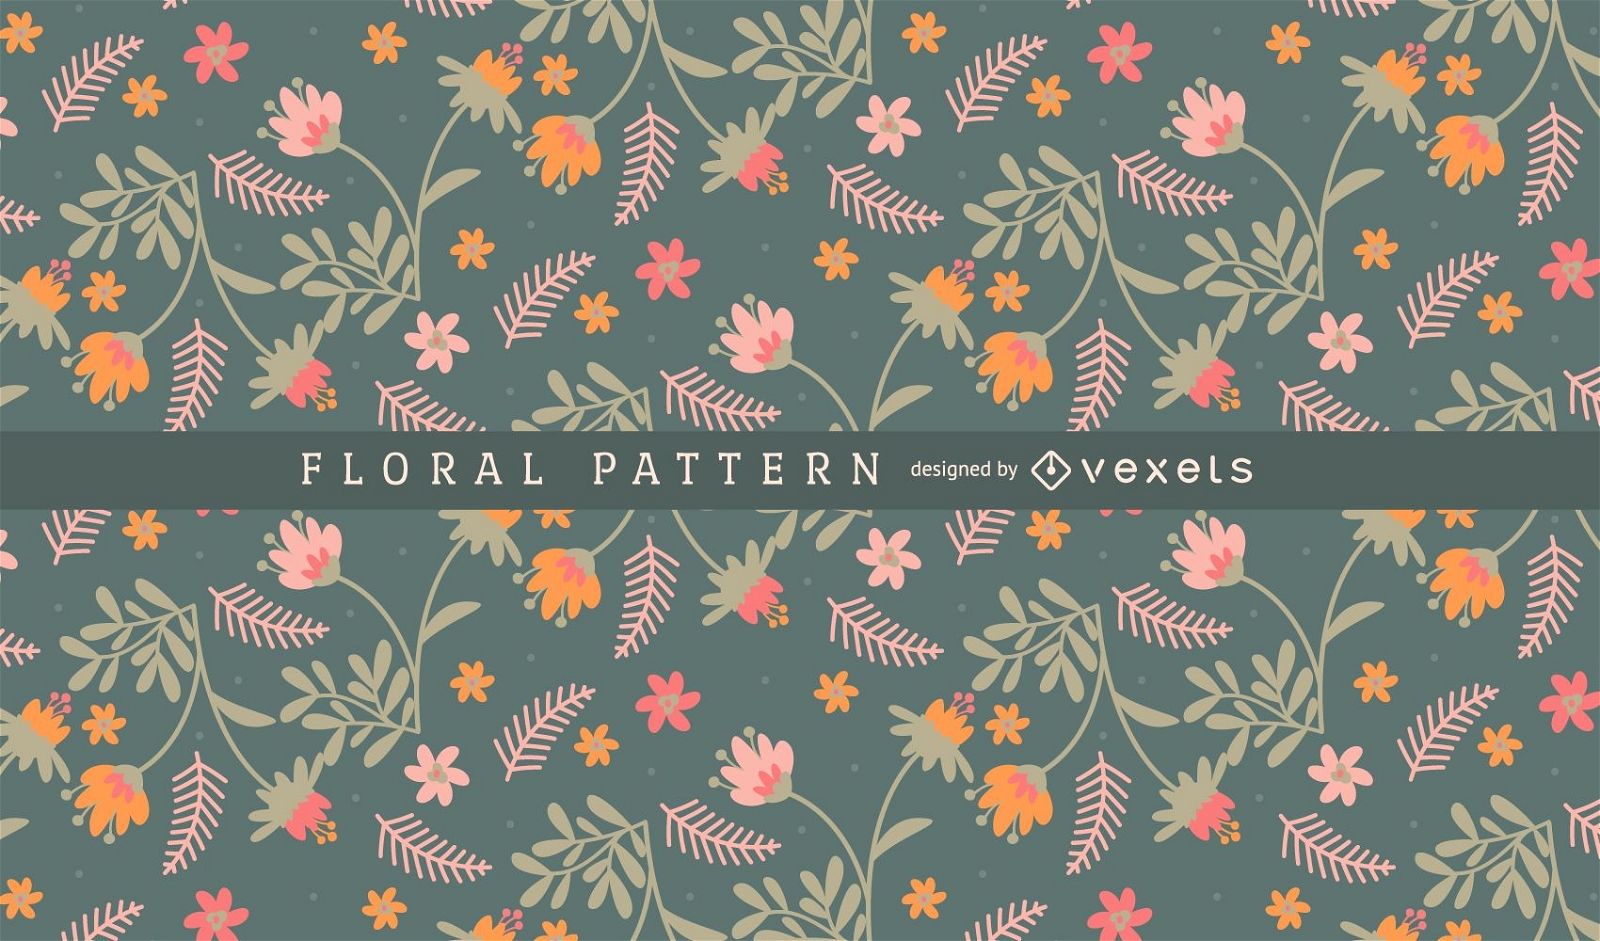 Flowers and leaves pattern background